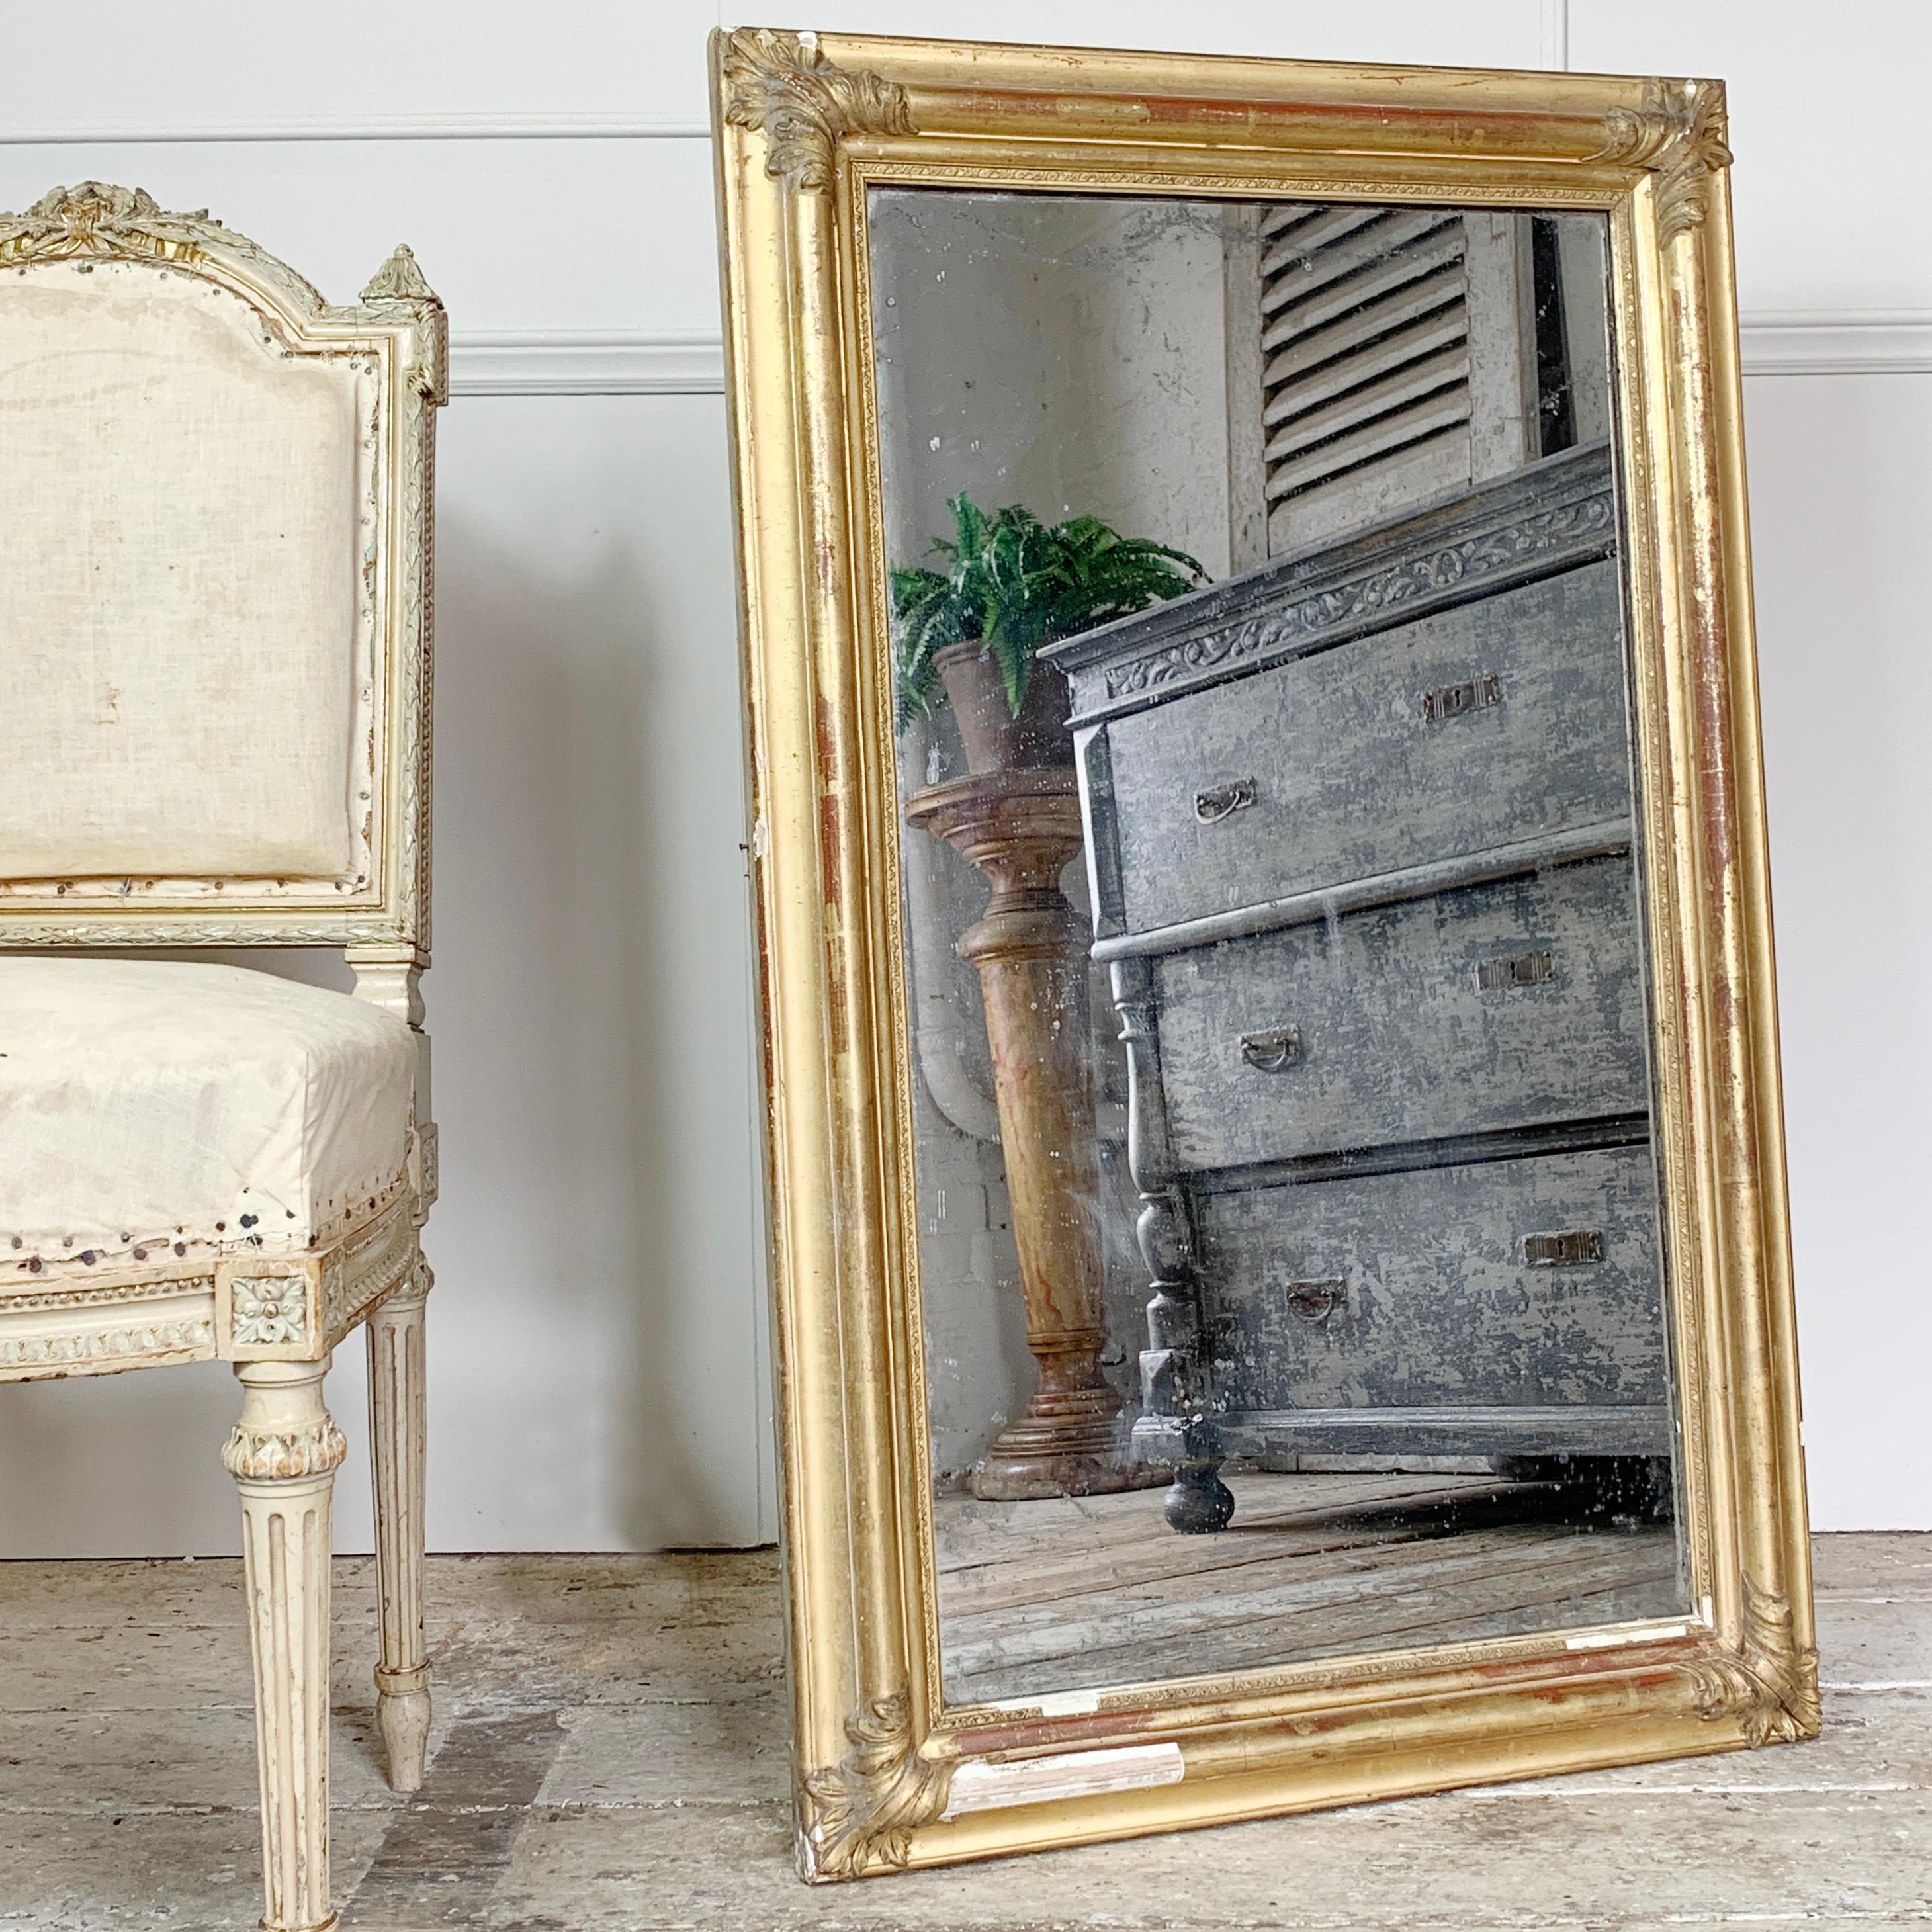 19th century antique French gilt mirror. Beautiful aged gilt and gesso frame. Foxed mirror plate in places
Original wooden back boards

Measures: 97cm height, 60cm width, 6cm depth, mirror glass 81cm x 45cm

Approximate weight 10kg
Some